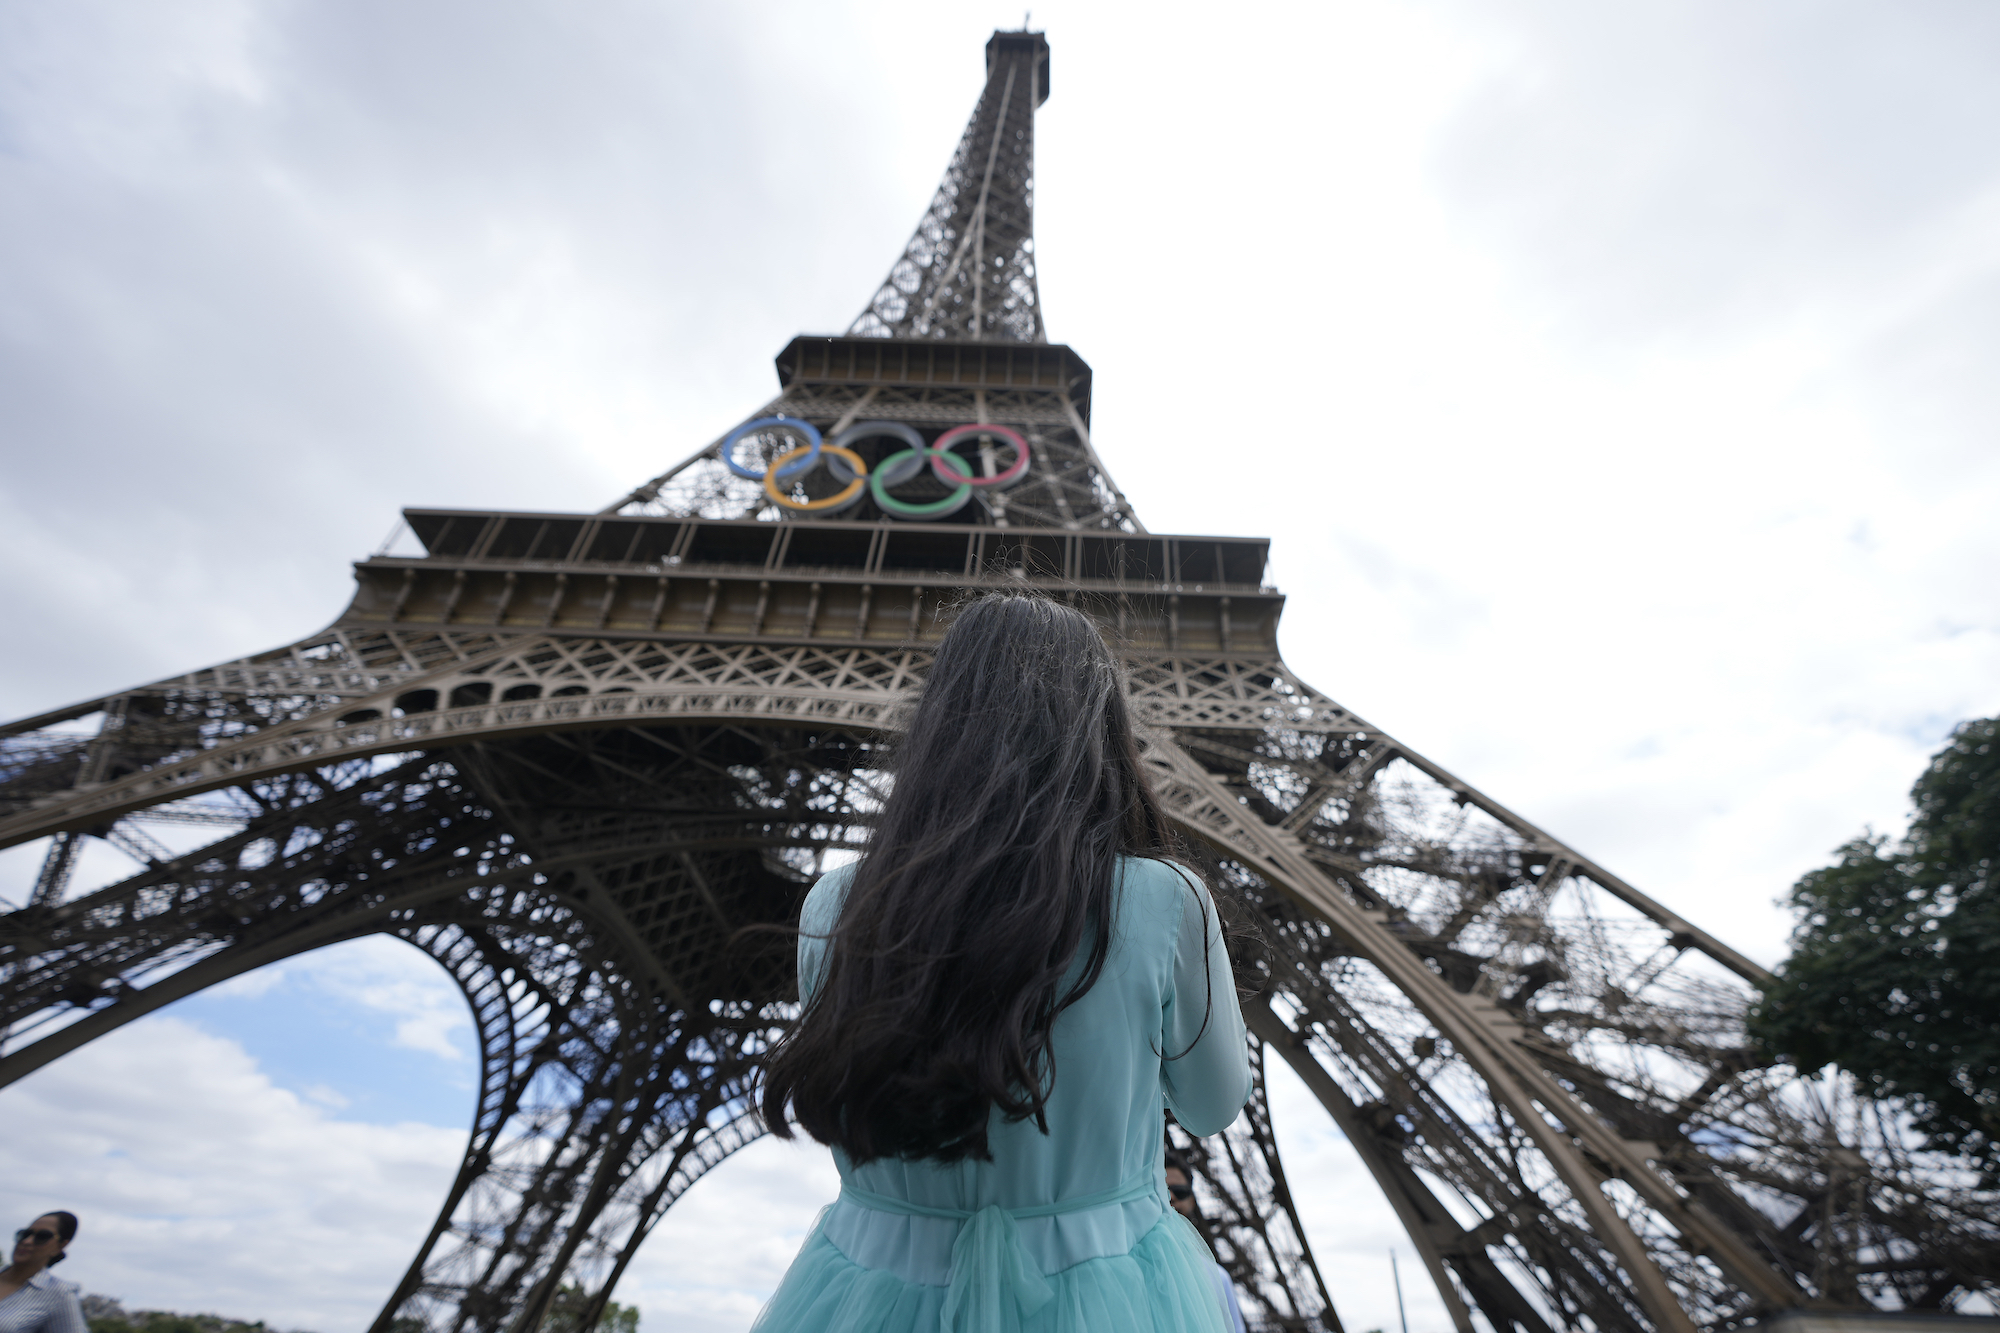 Tourist stands in front of Eiffel Tower in Paris, with Olympic rings on the exterior.